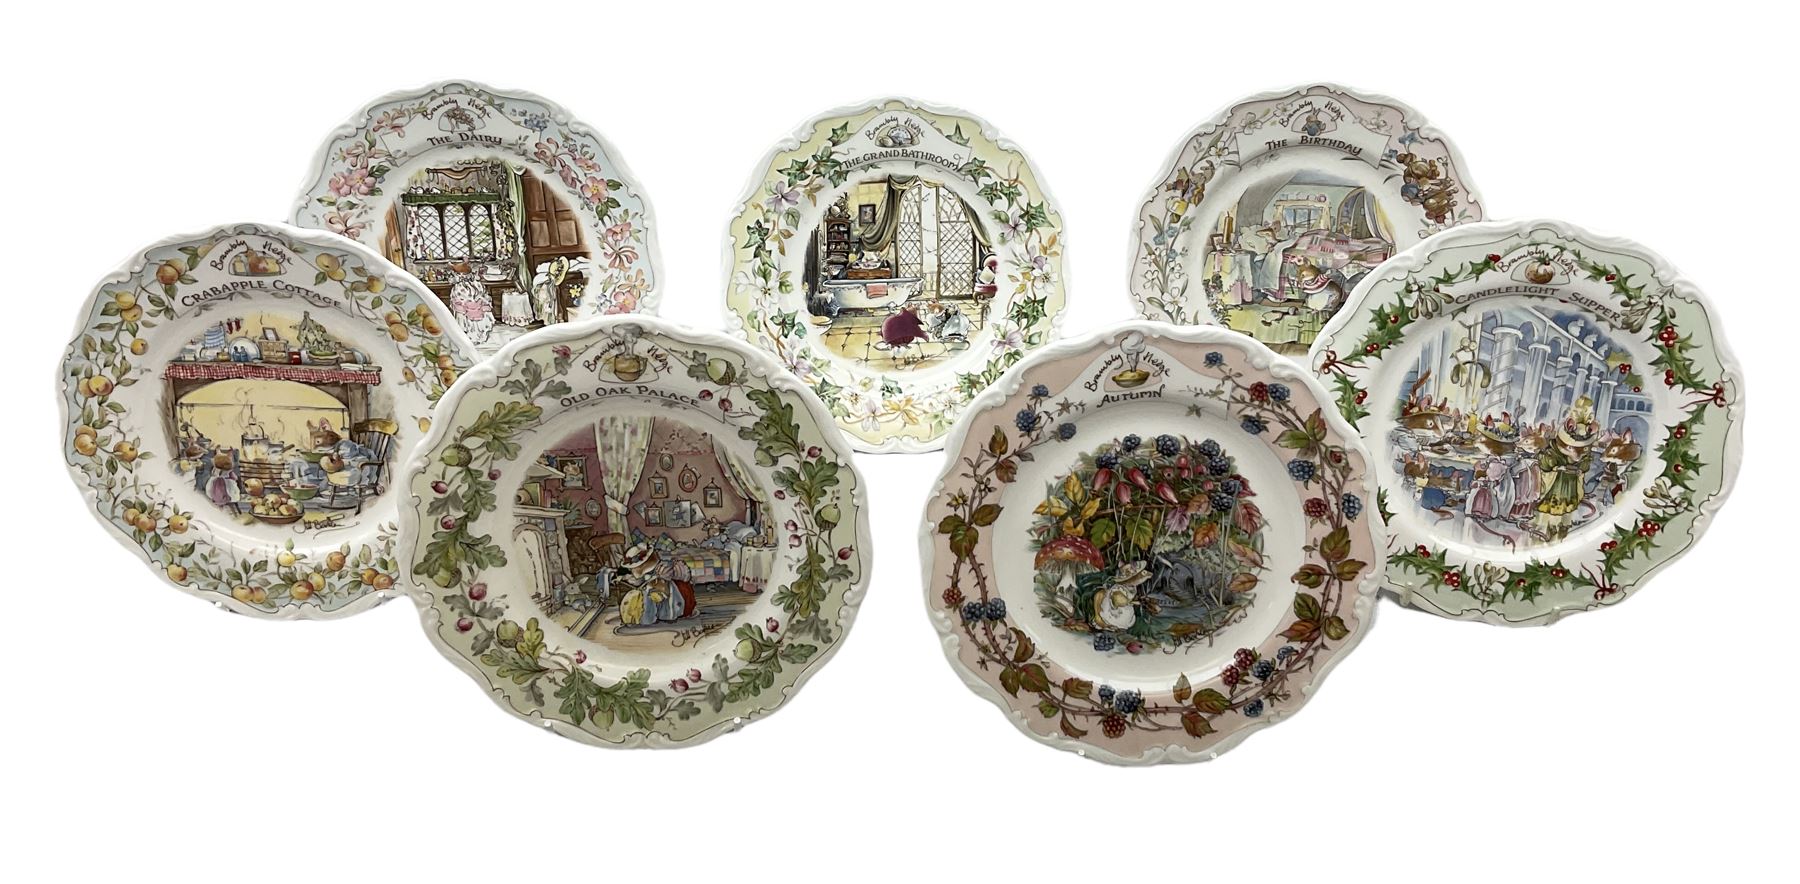 How to Care For and Clean Royal Doulton - Antique HQ